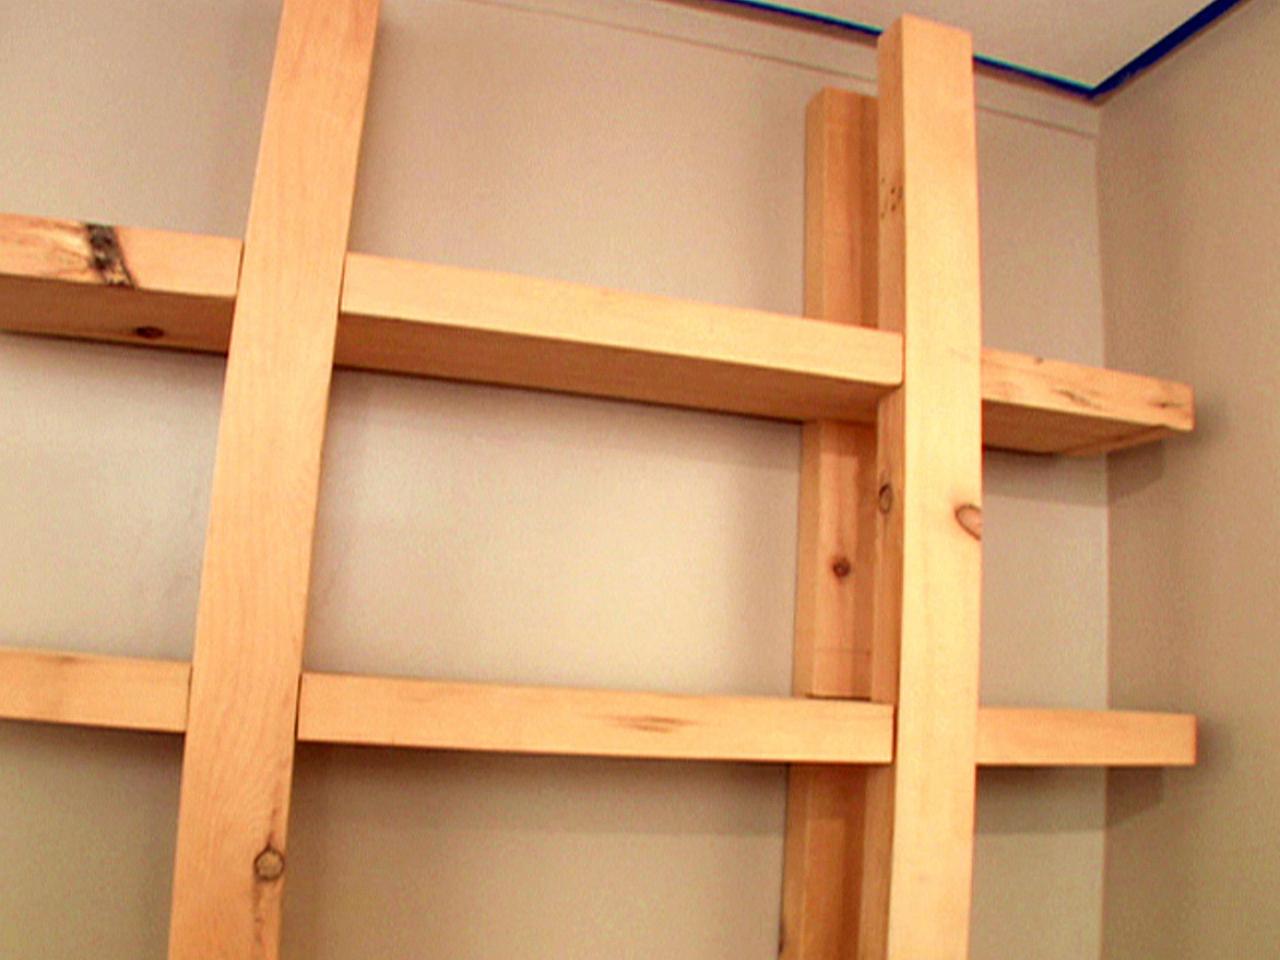 How To Build A Wooden Shelving Unit htm